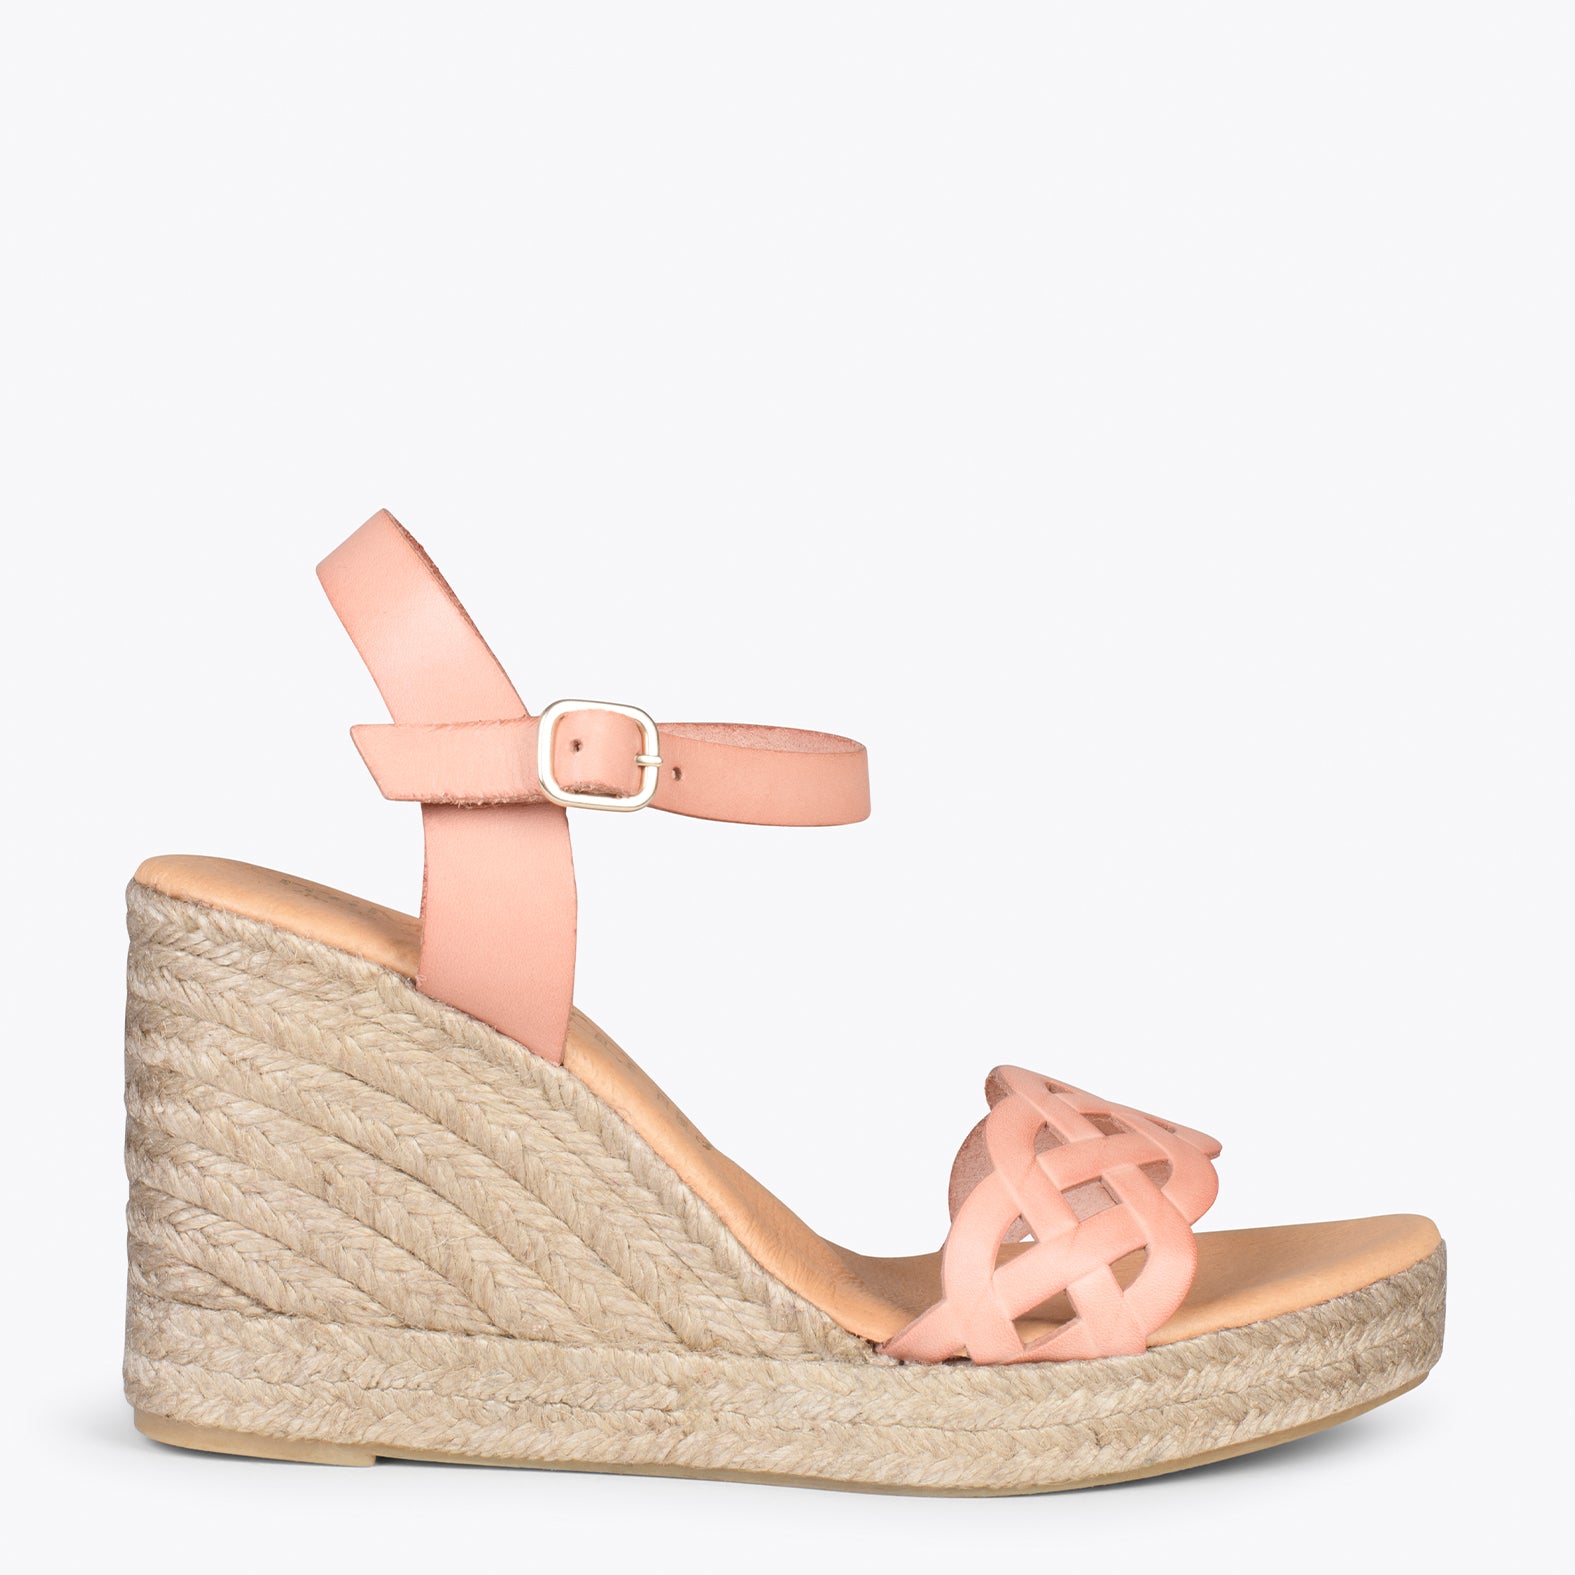 OASIS – NUDE espadrille wedges with braided front